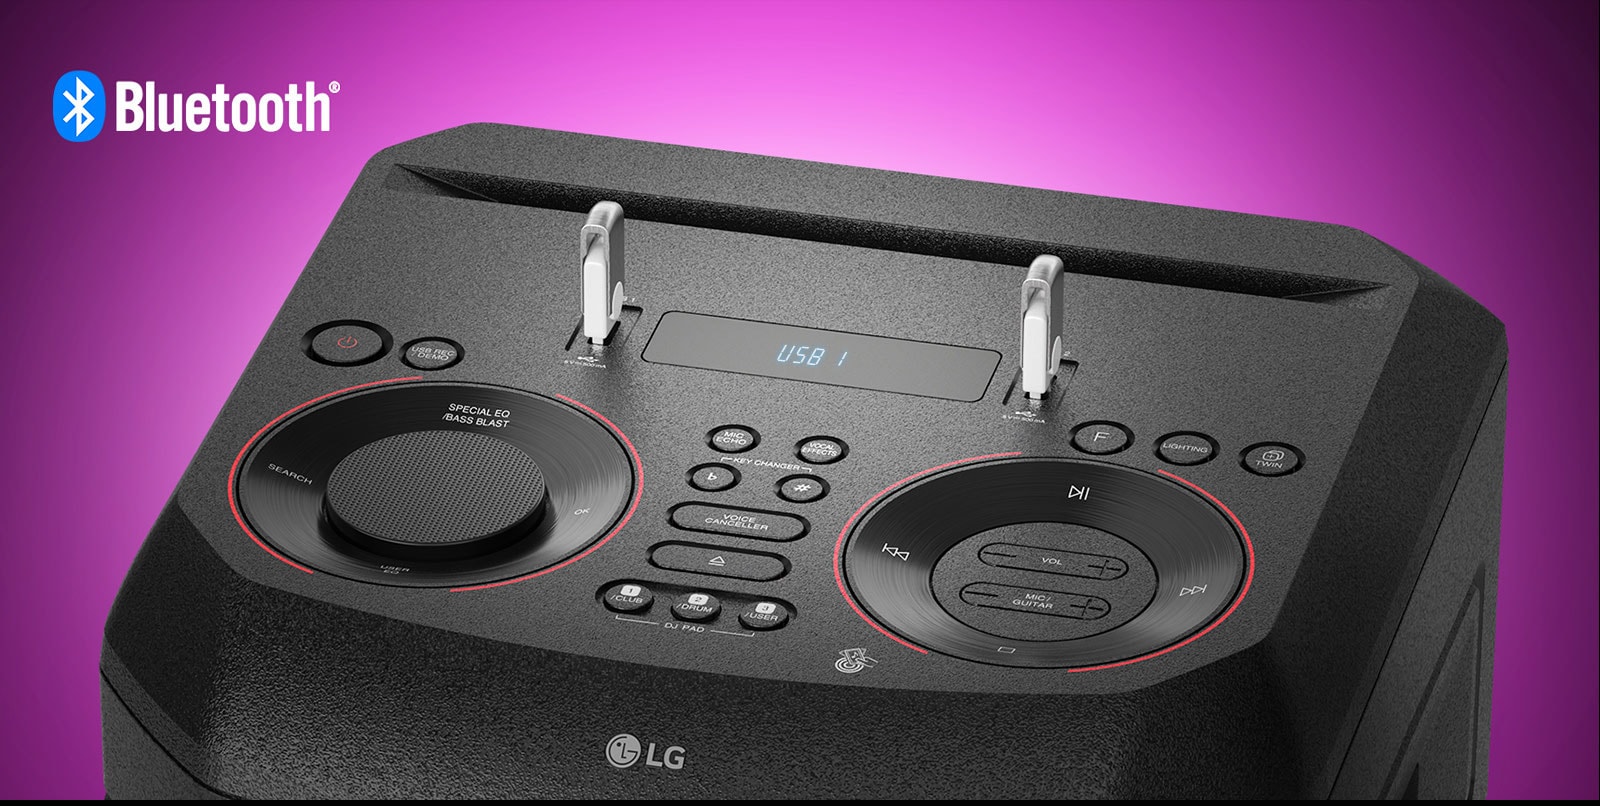 A closeup view of controls on top of LG XBOOM, with two USBs plugged in. A Bluetooth logo is shown in the upper left corner.